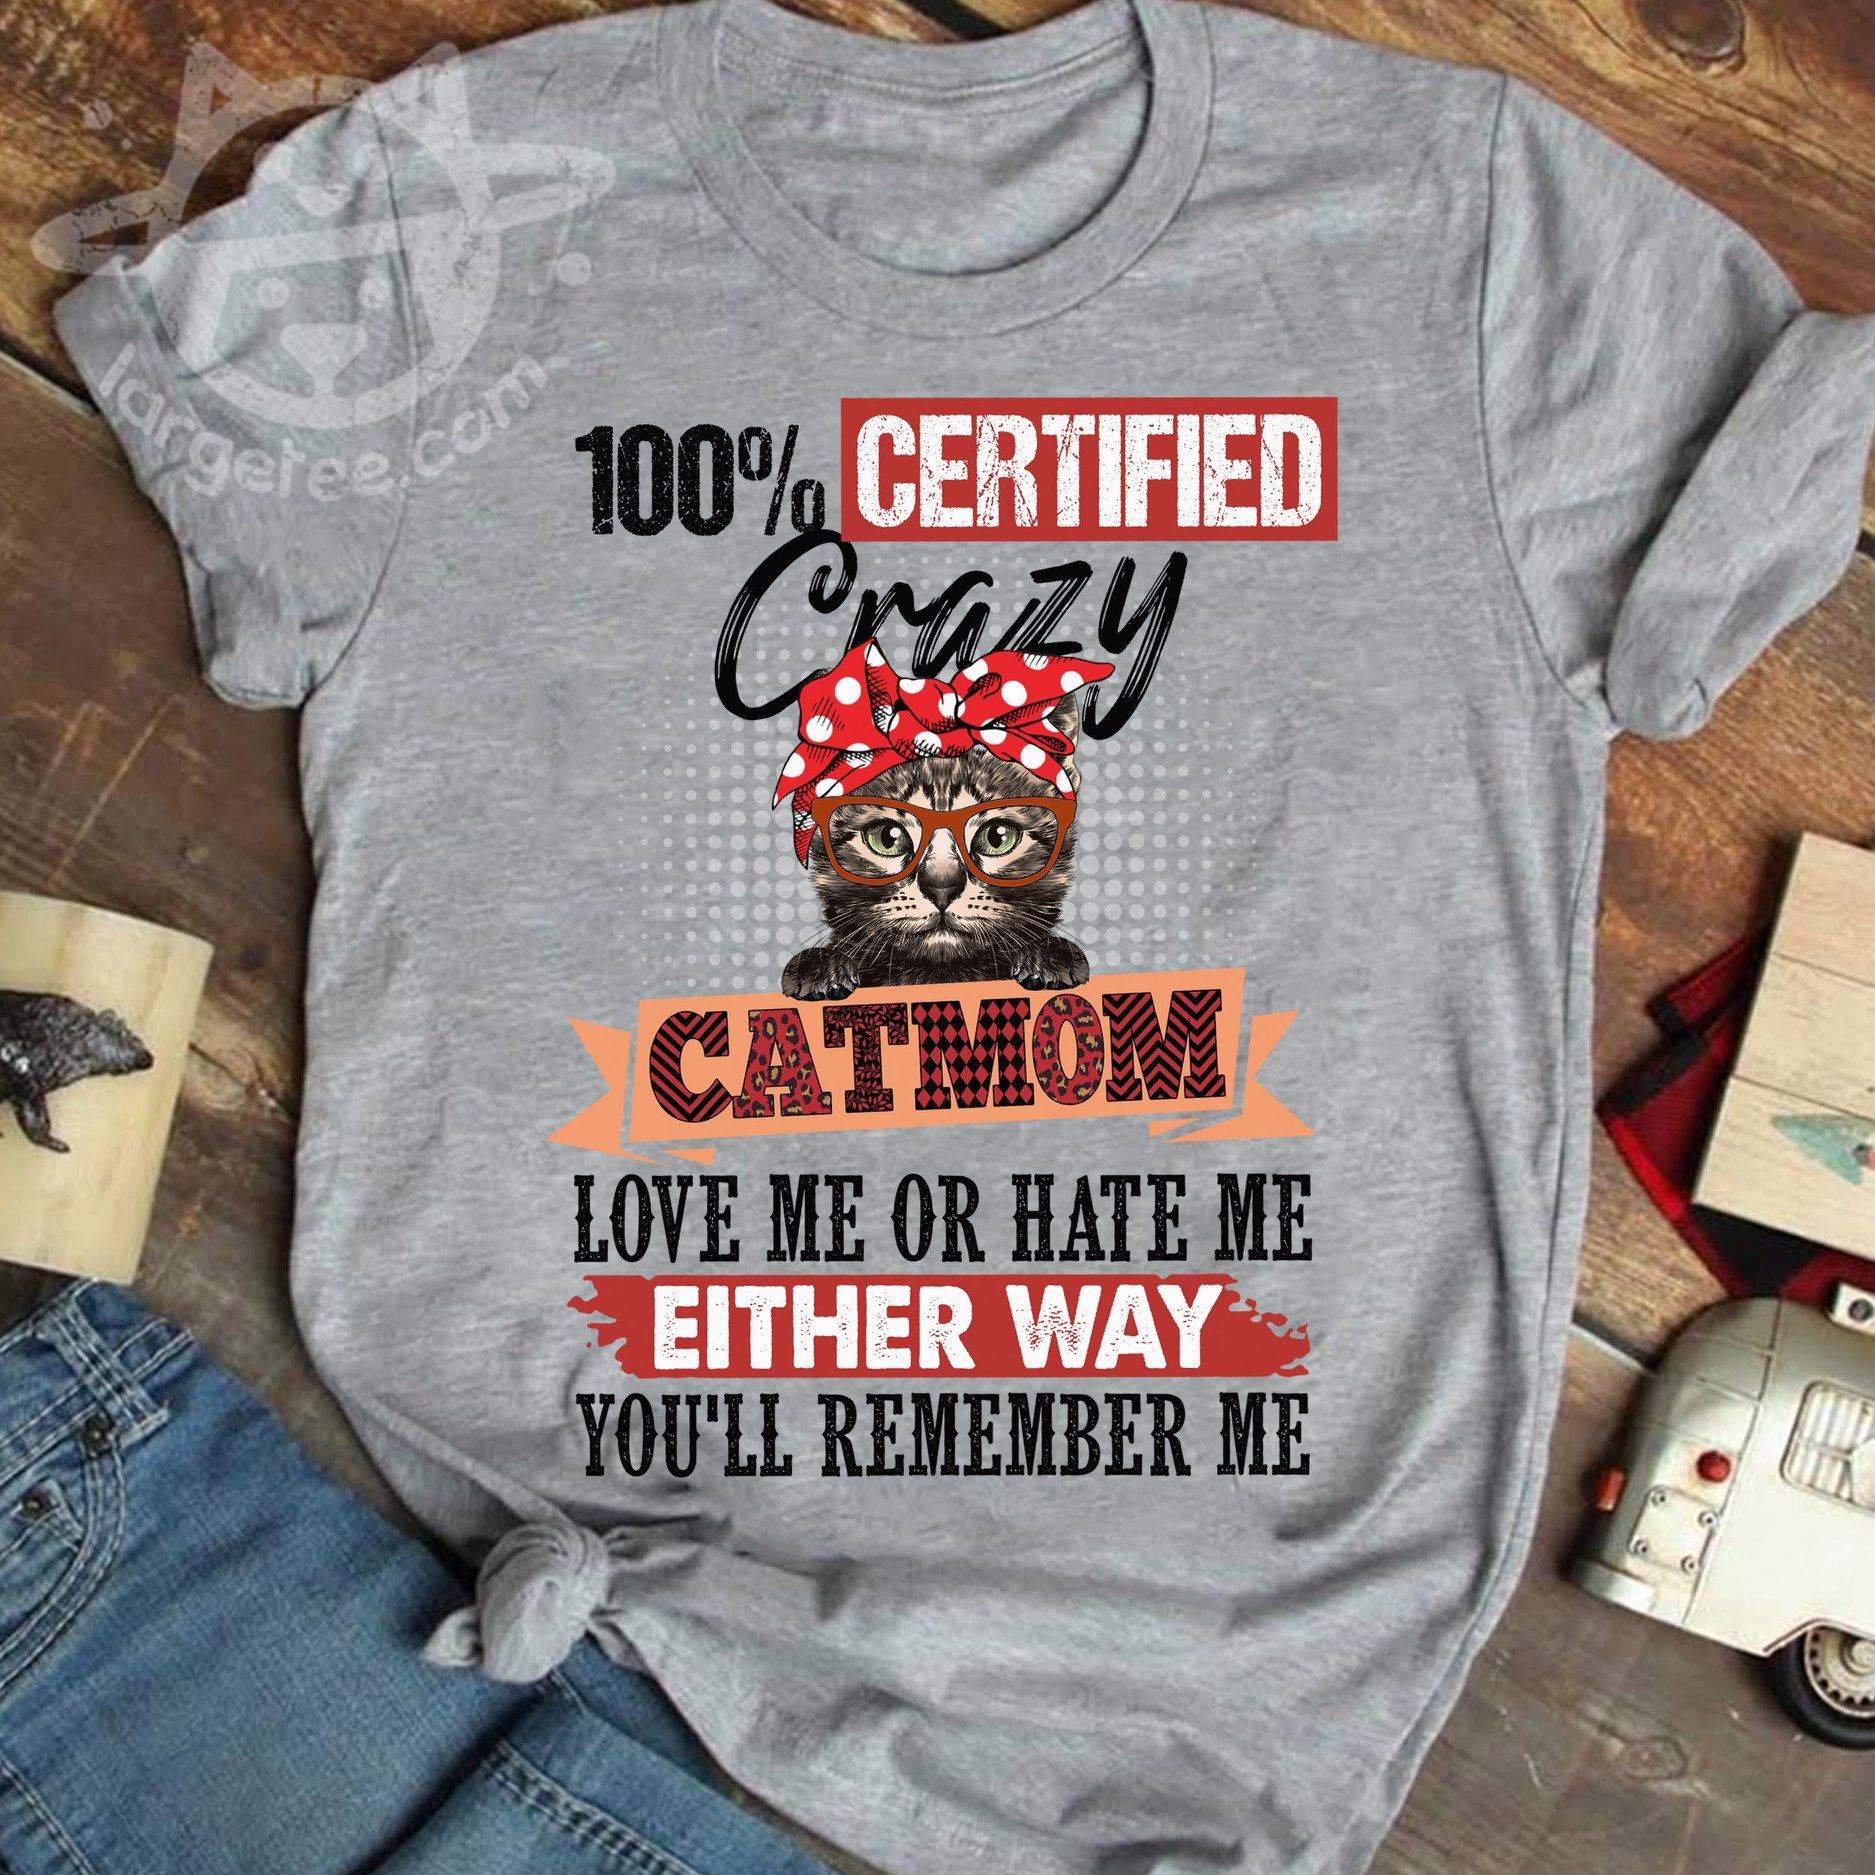 100% certified crazy catmom love me or hate me either way - Cat lover